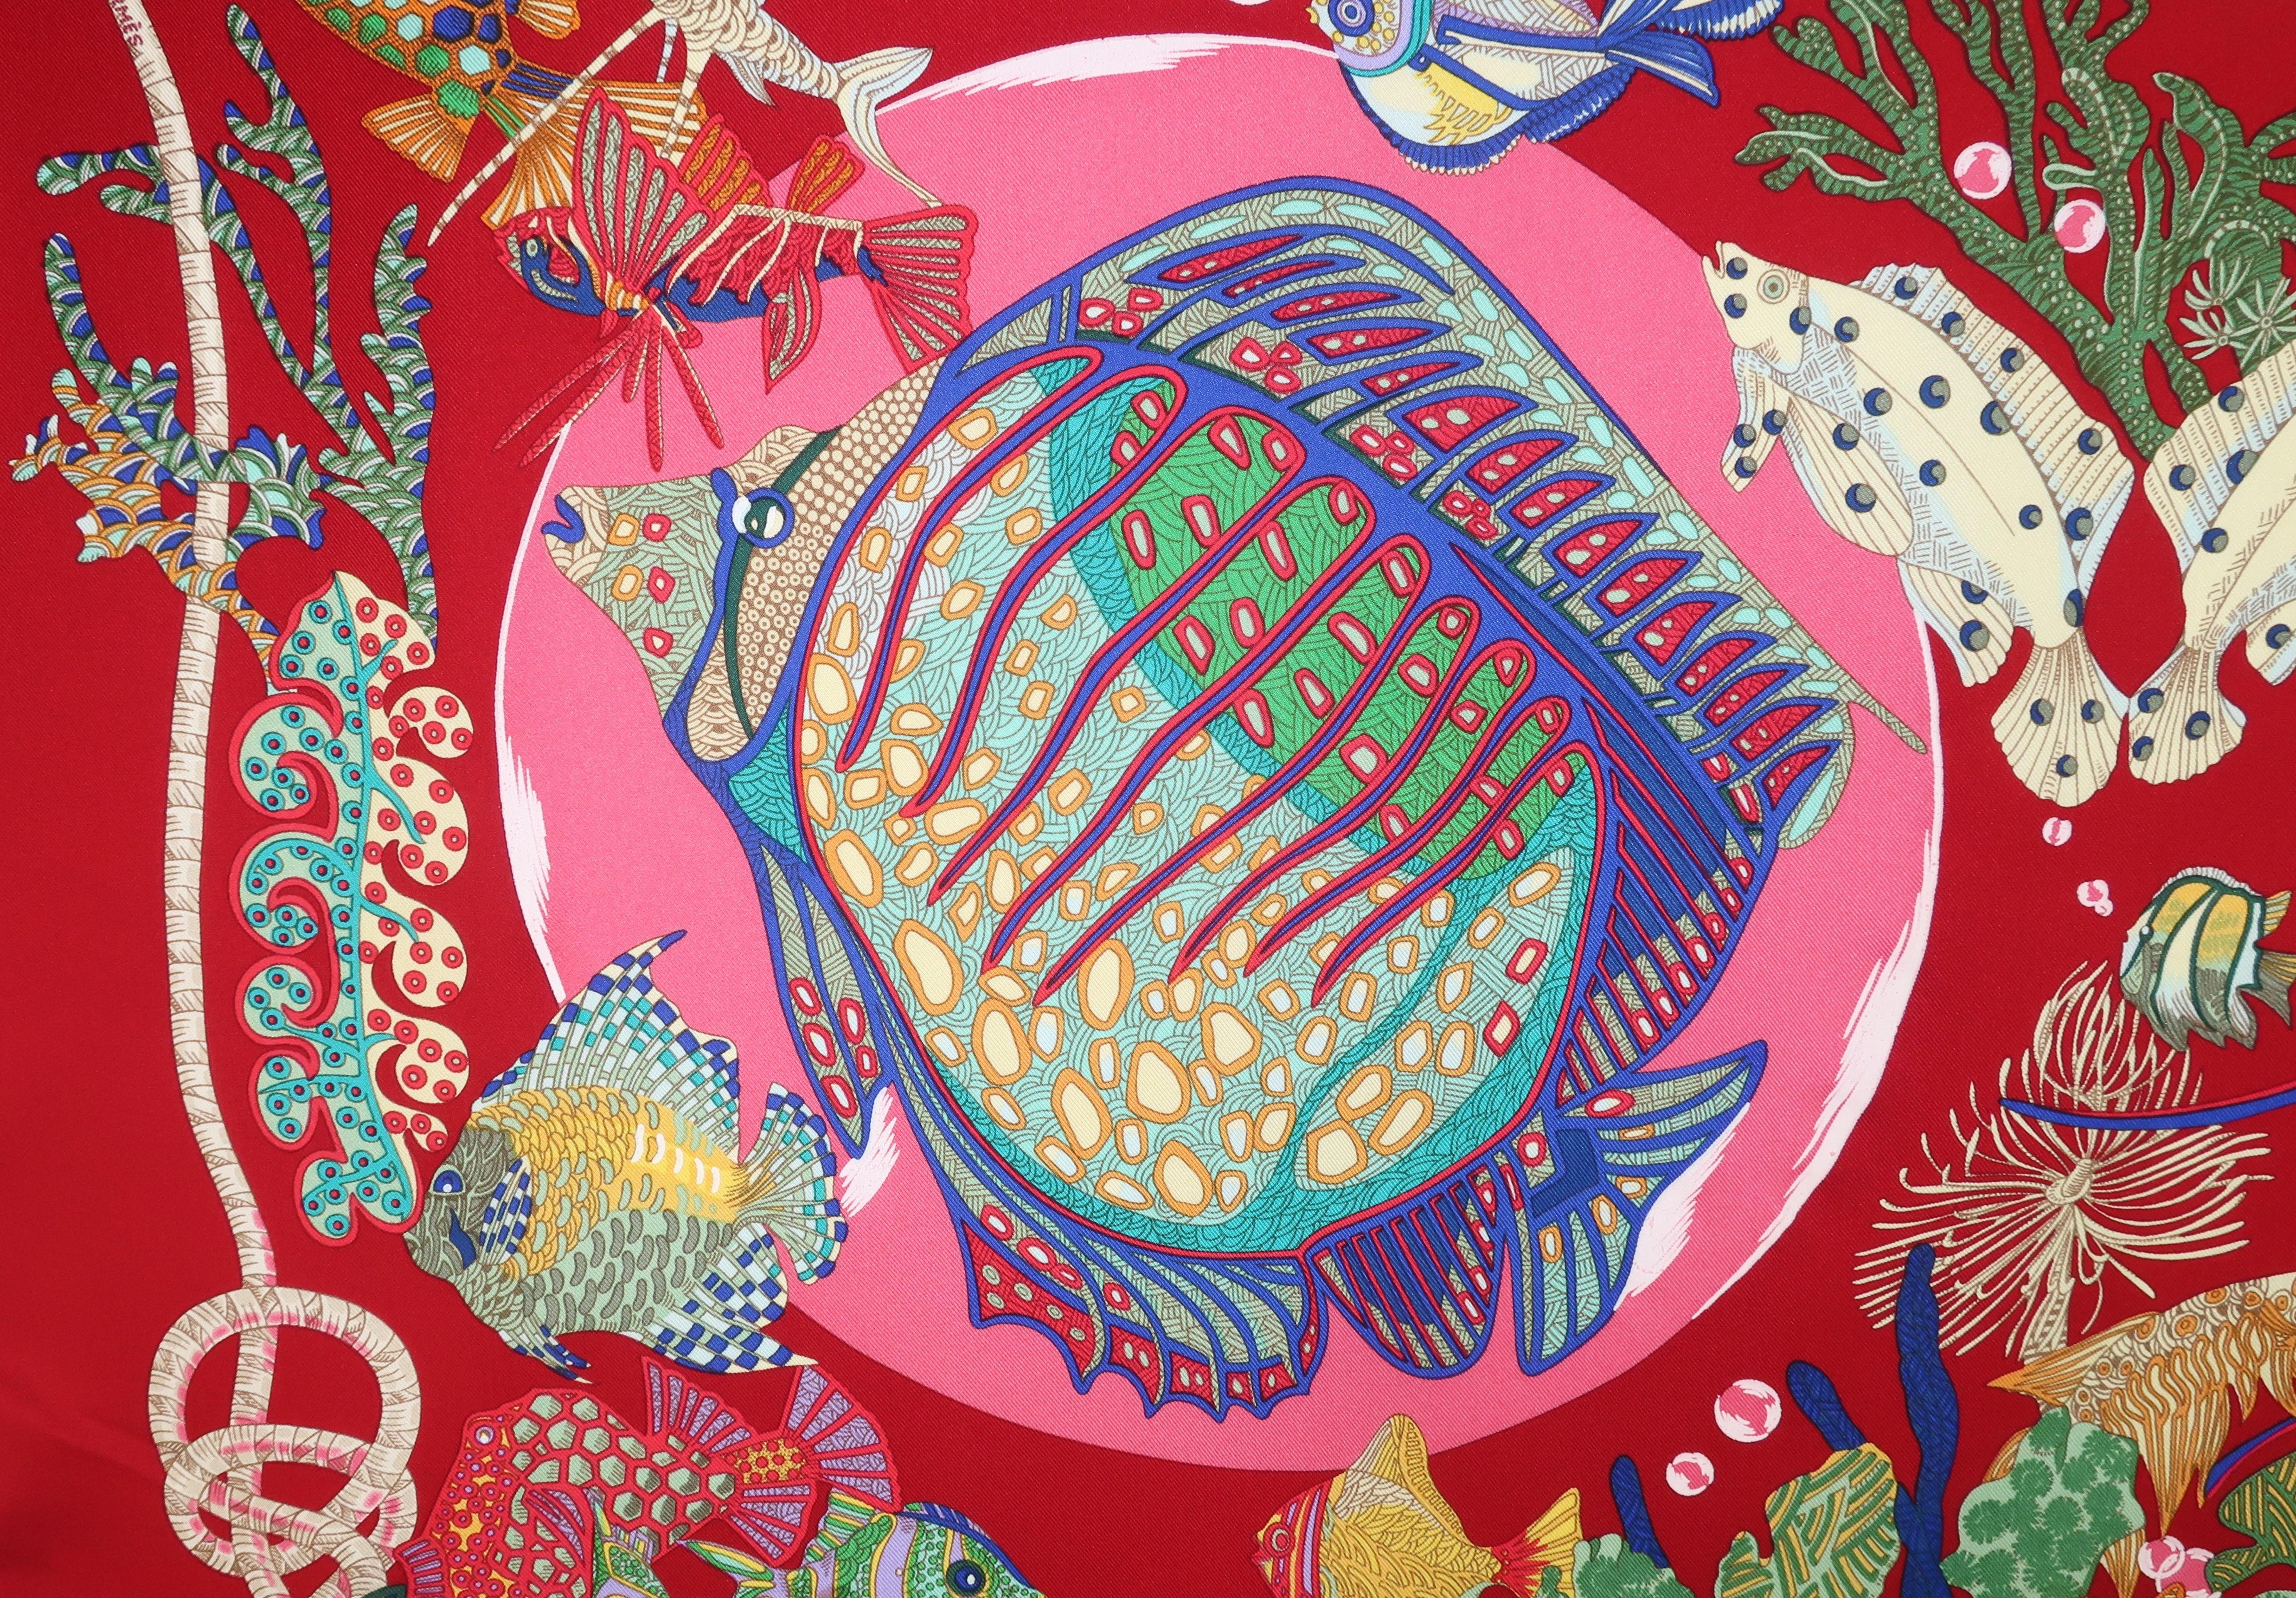 An enchanting 1992 silk scarf design by artist, Annie Faivre, for Hermès aptly entitled 'Grand Fonds' or 'The Deep Sea'.  A deep cherry red serves as backdrop to large and small fish in various shades of blue, green and yellow with pink and white